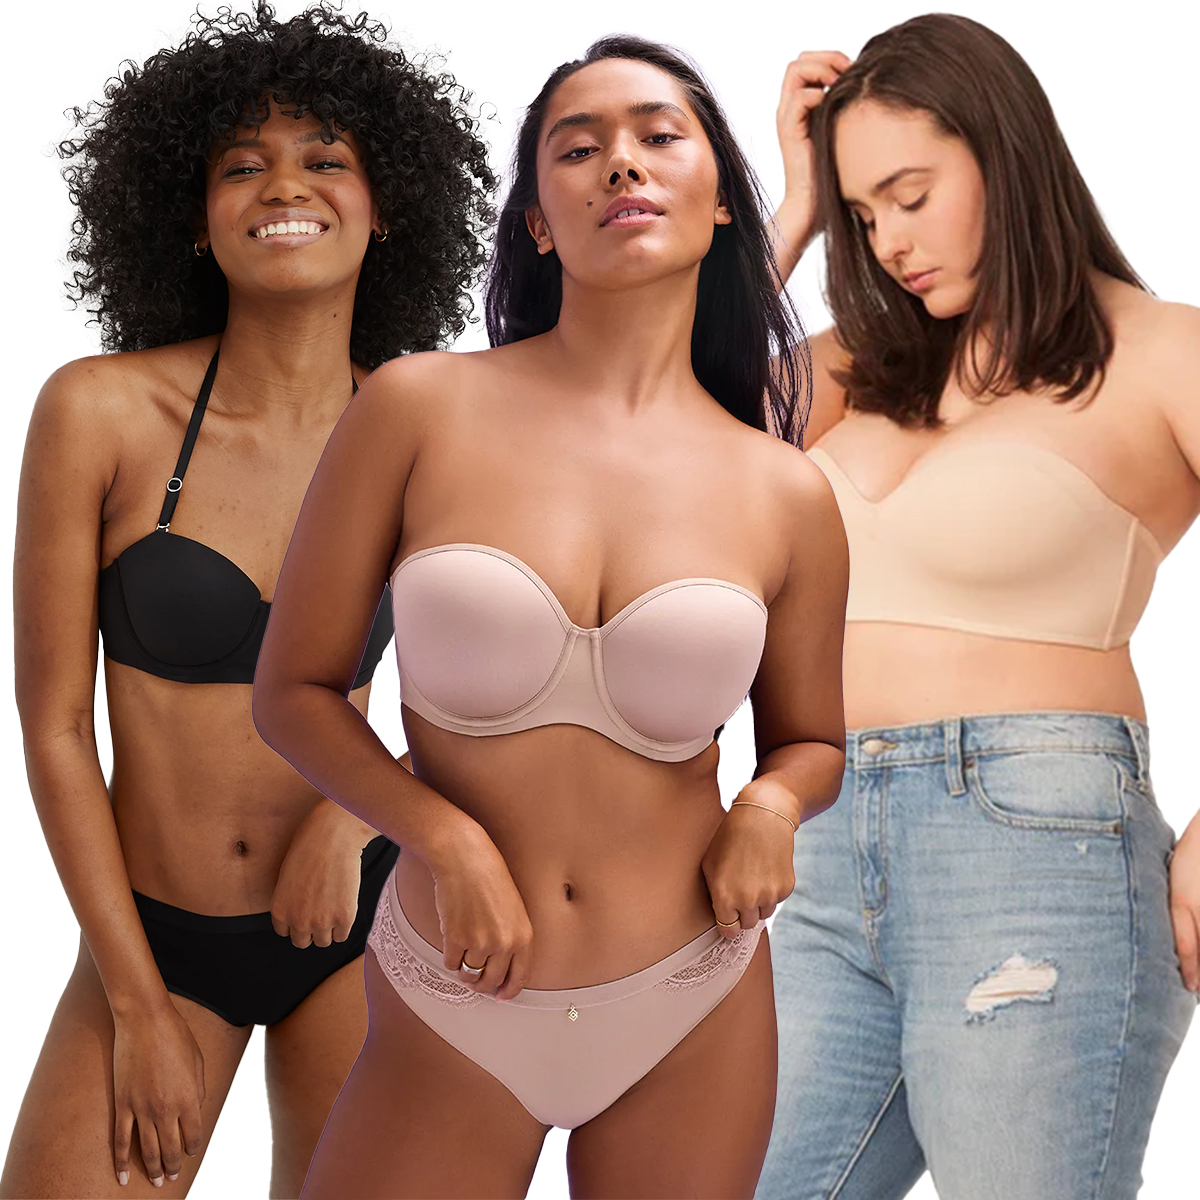 Best-Selling Skims Bras Review  Gallery posted by StephaniePernas